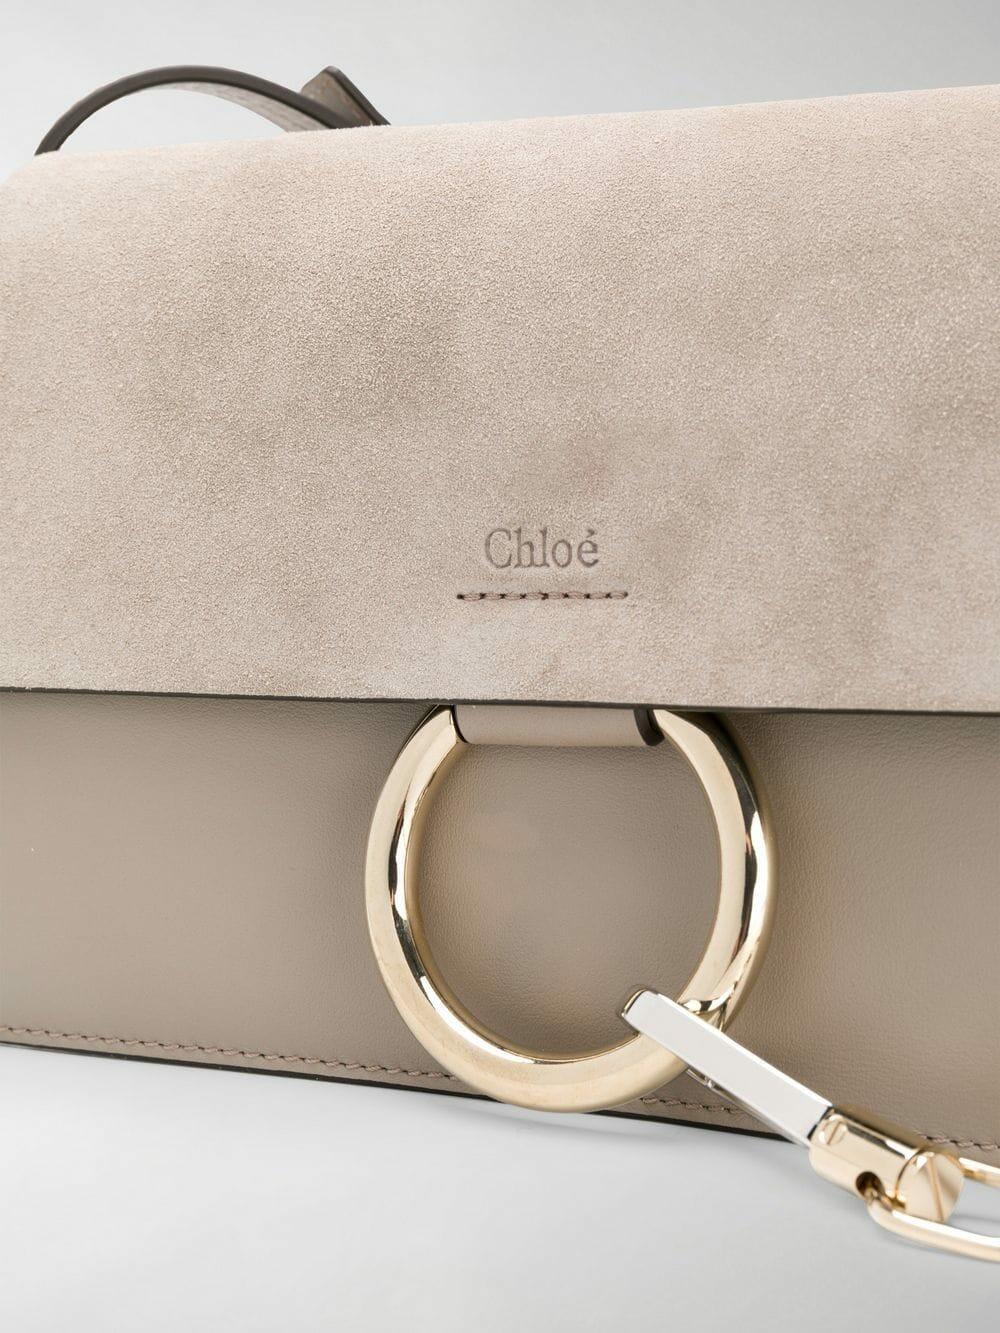 Chloe Motty Grey Calfskin Leather and Suede C Chain Clutch Bag